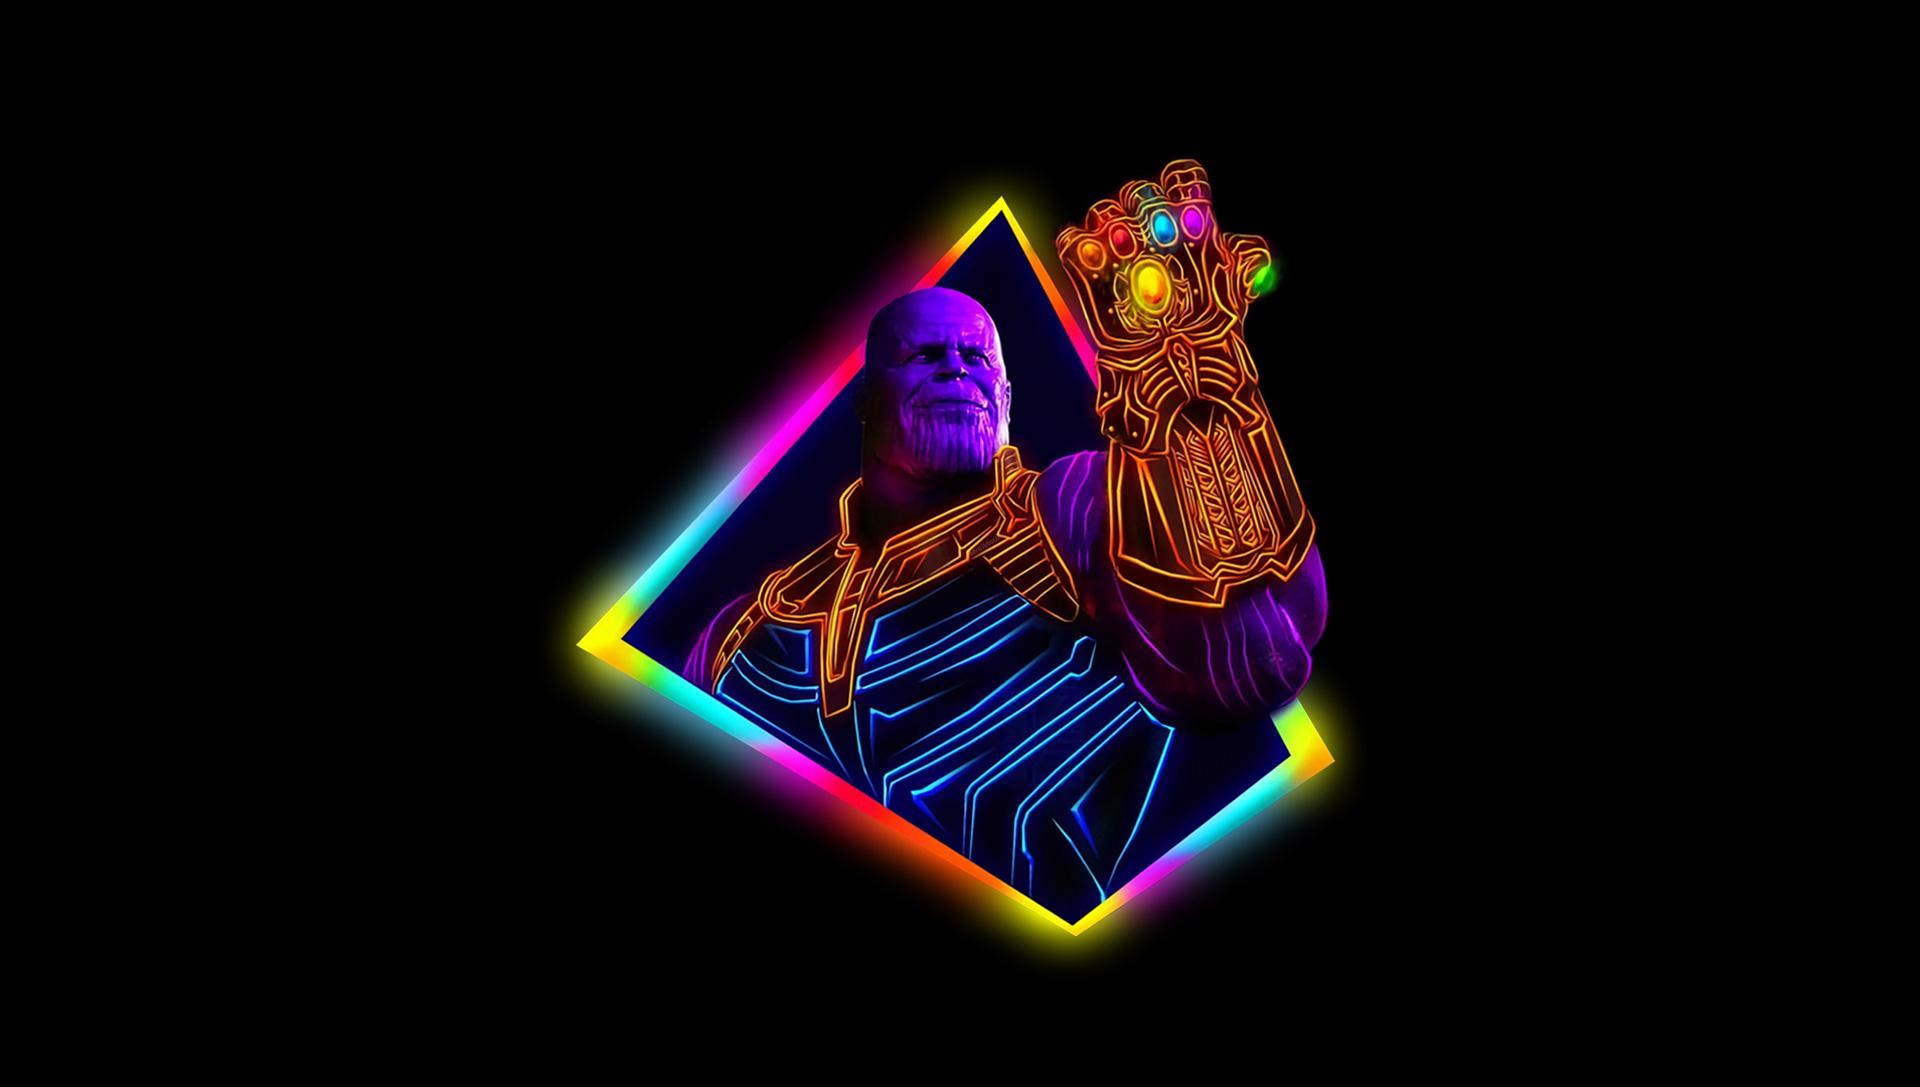 Thanos Avengers Infinity War 80S Style Artwork, HD Movies